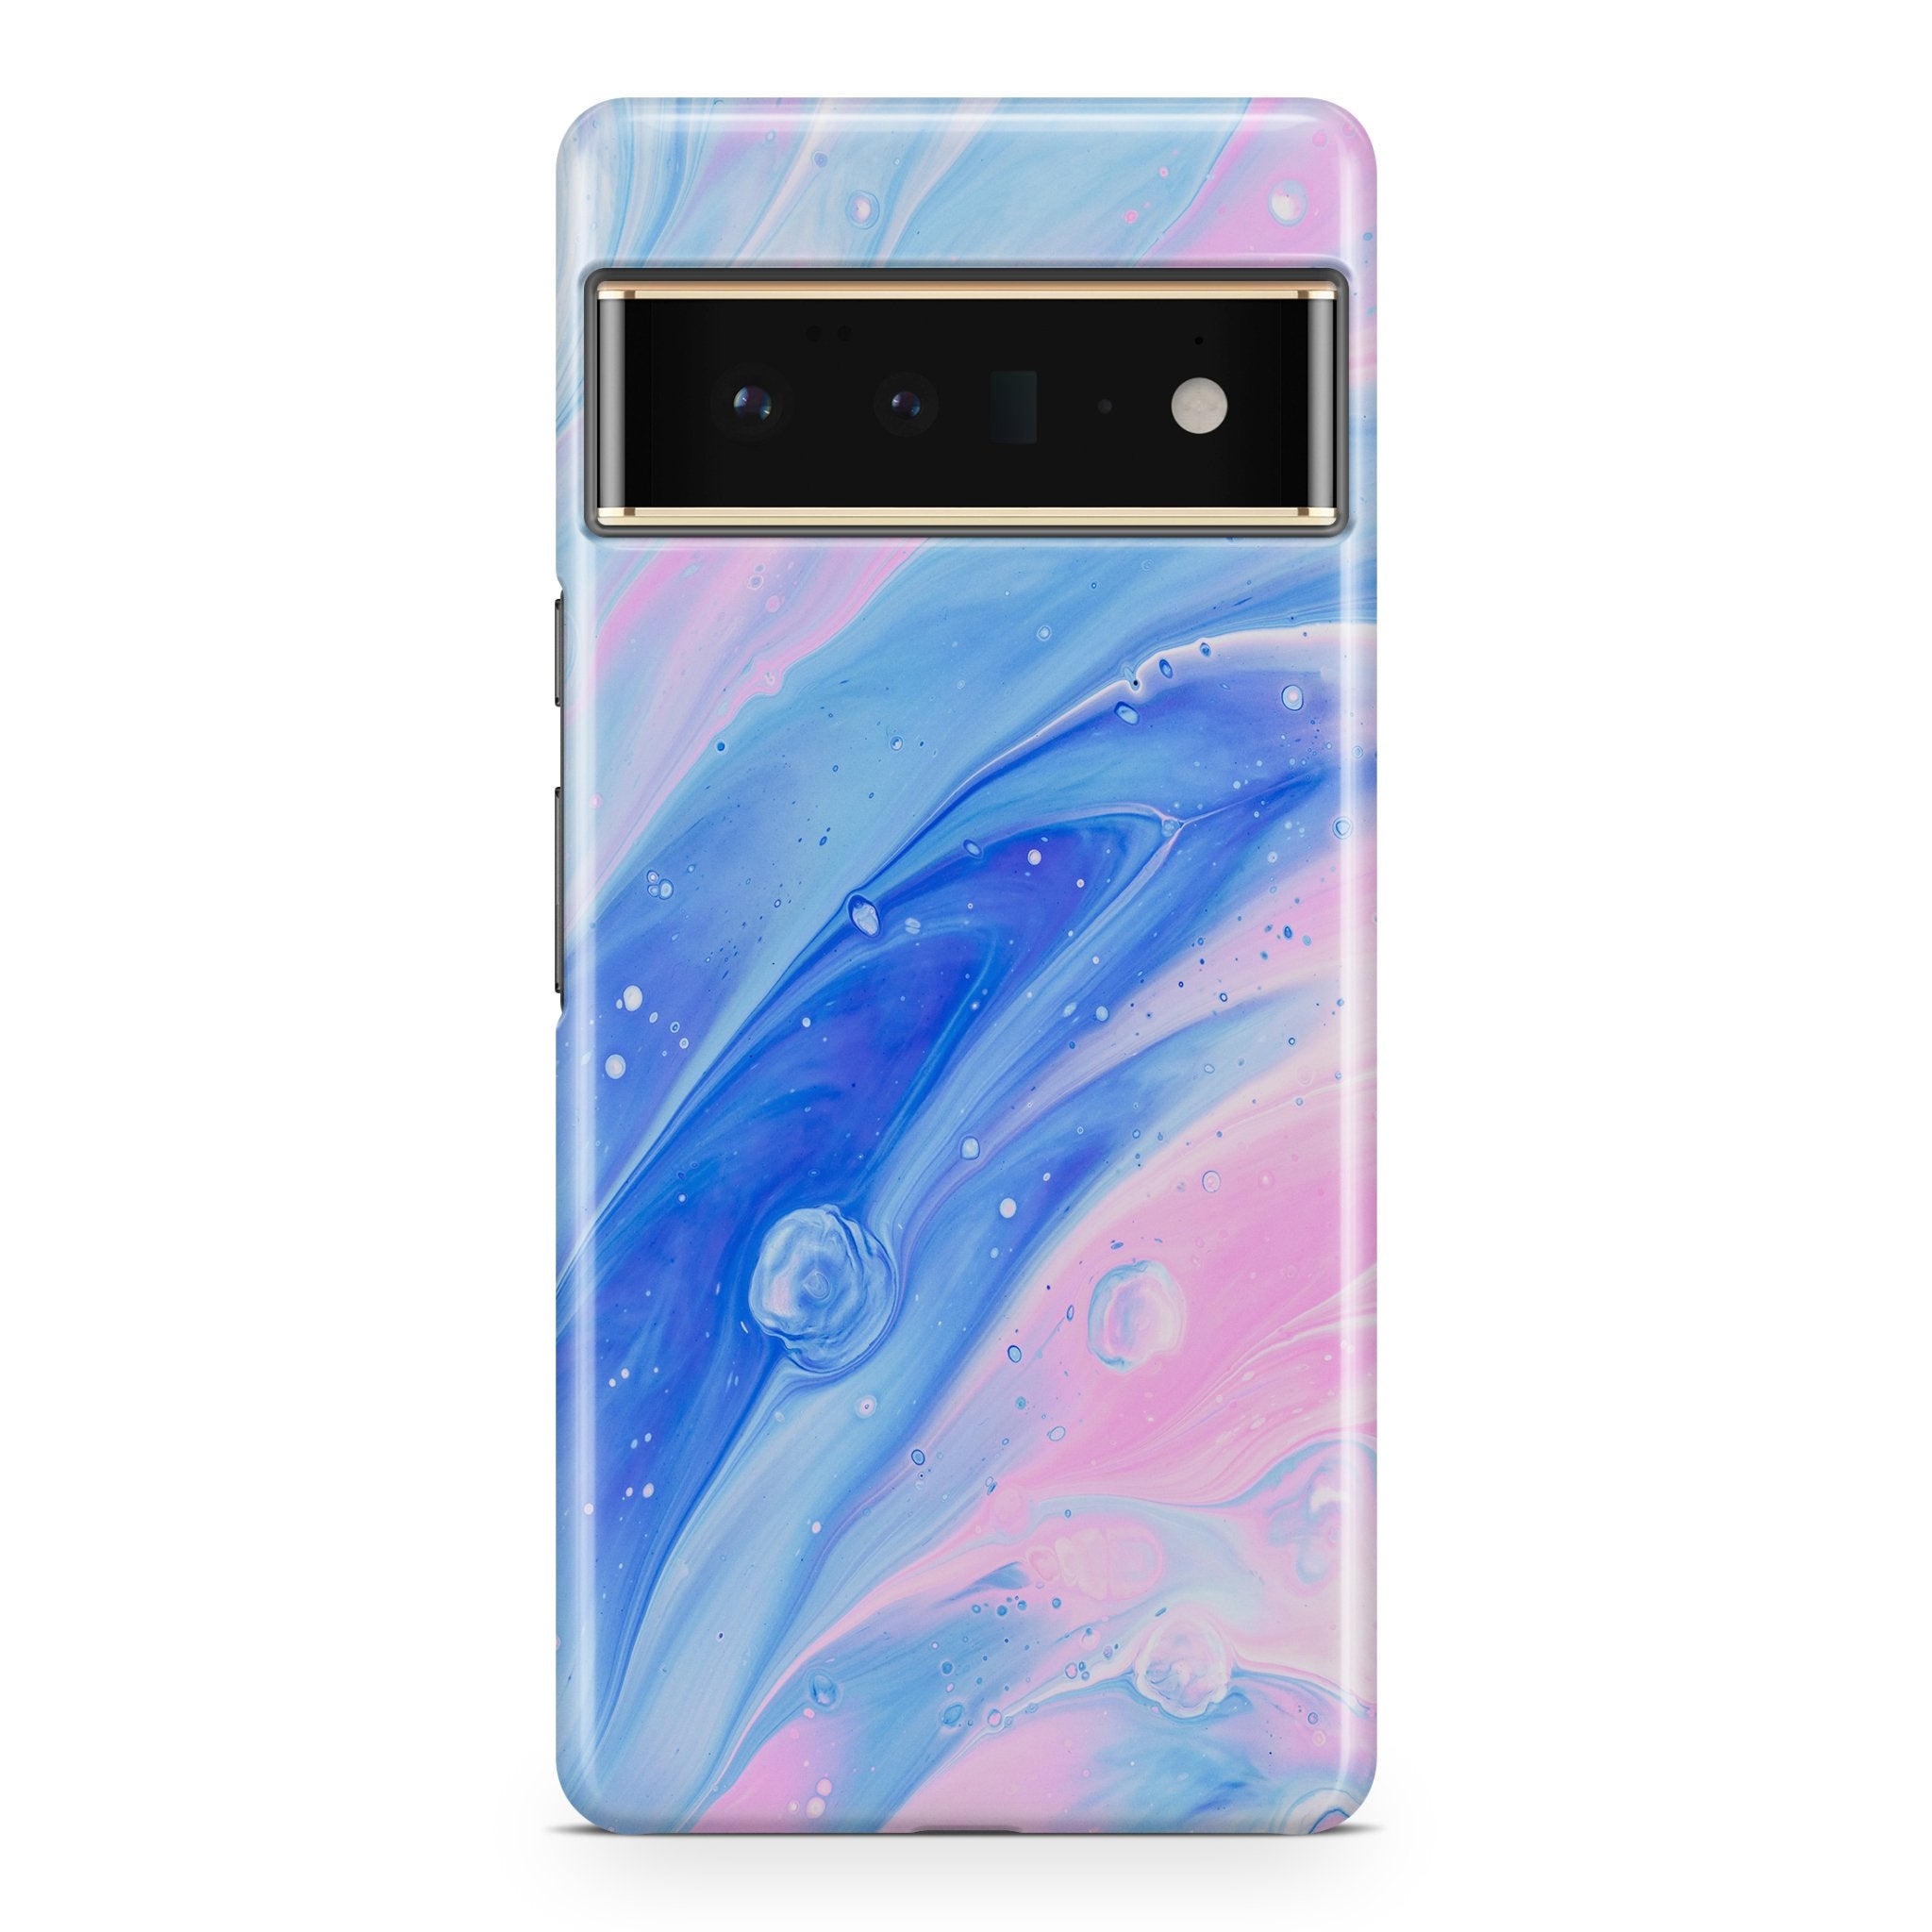 Calming Oil Paint - Google phone case designs by CaseSwagger